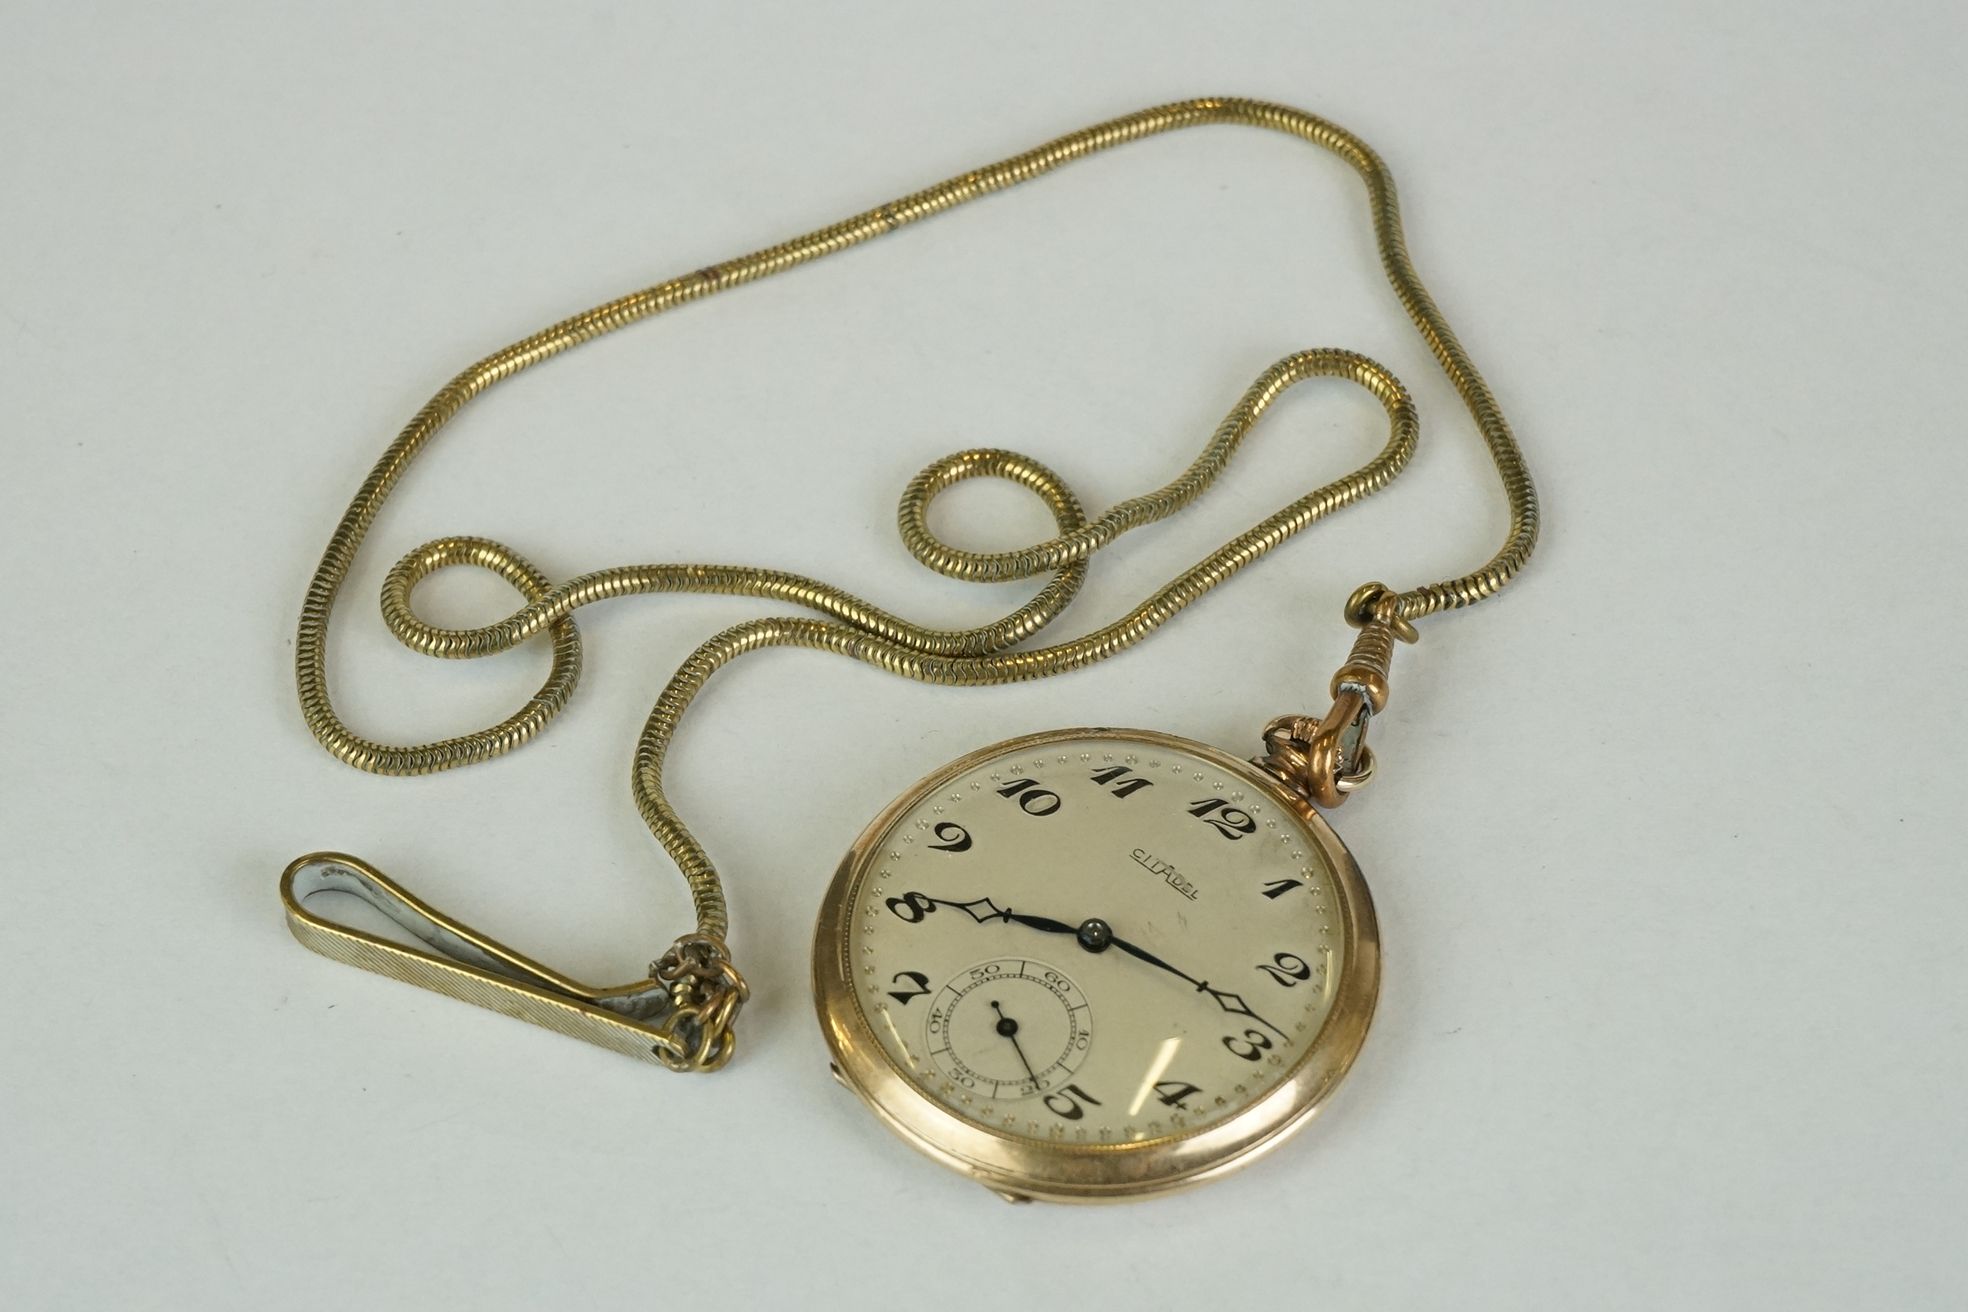 Rolled gold open faced Citadel pocket watch with gilt Albert chain